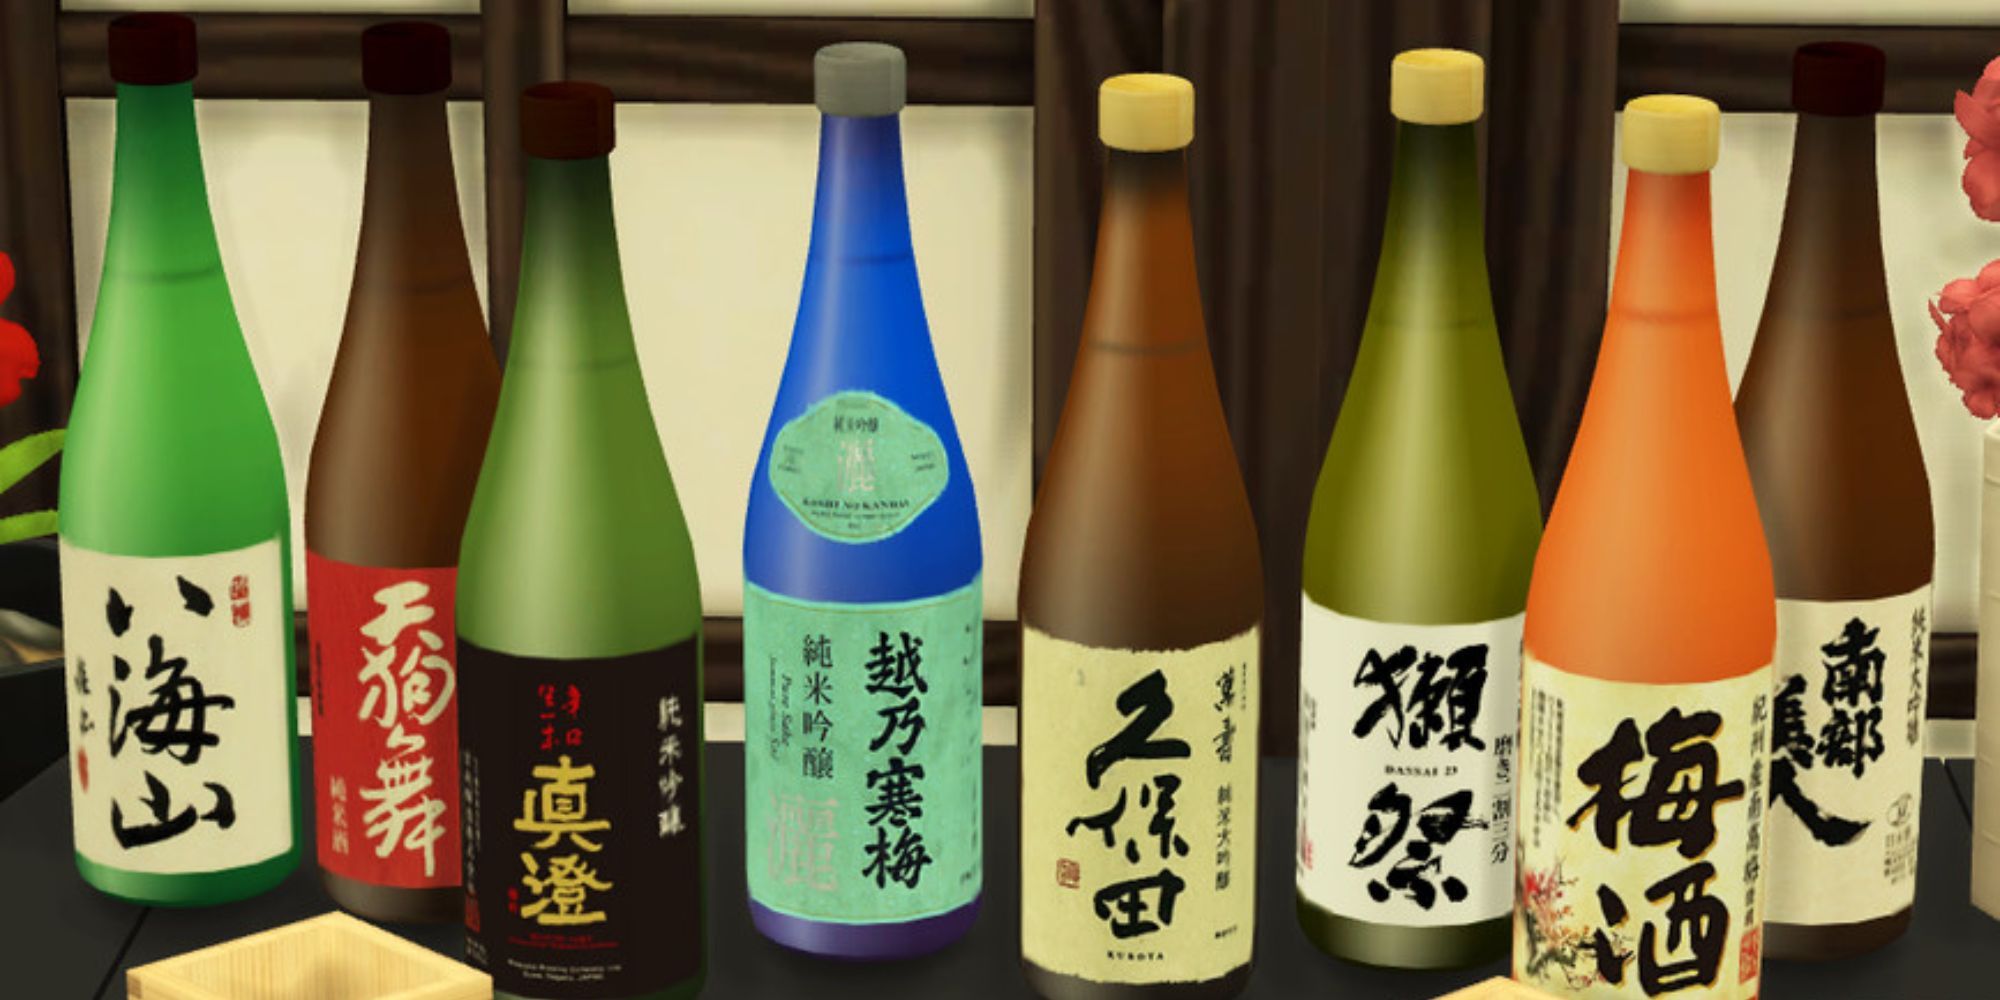 A collection of sake bottles for The Sims 4